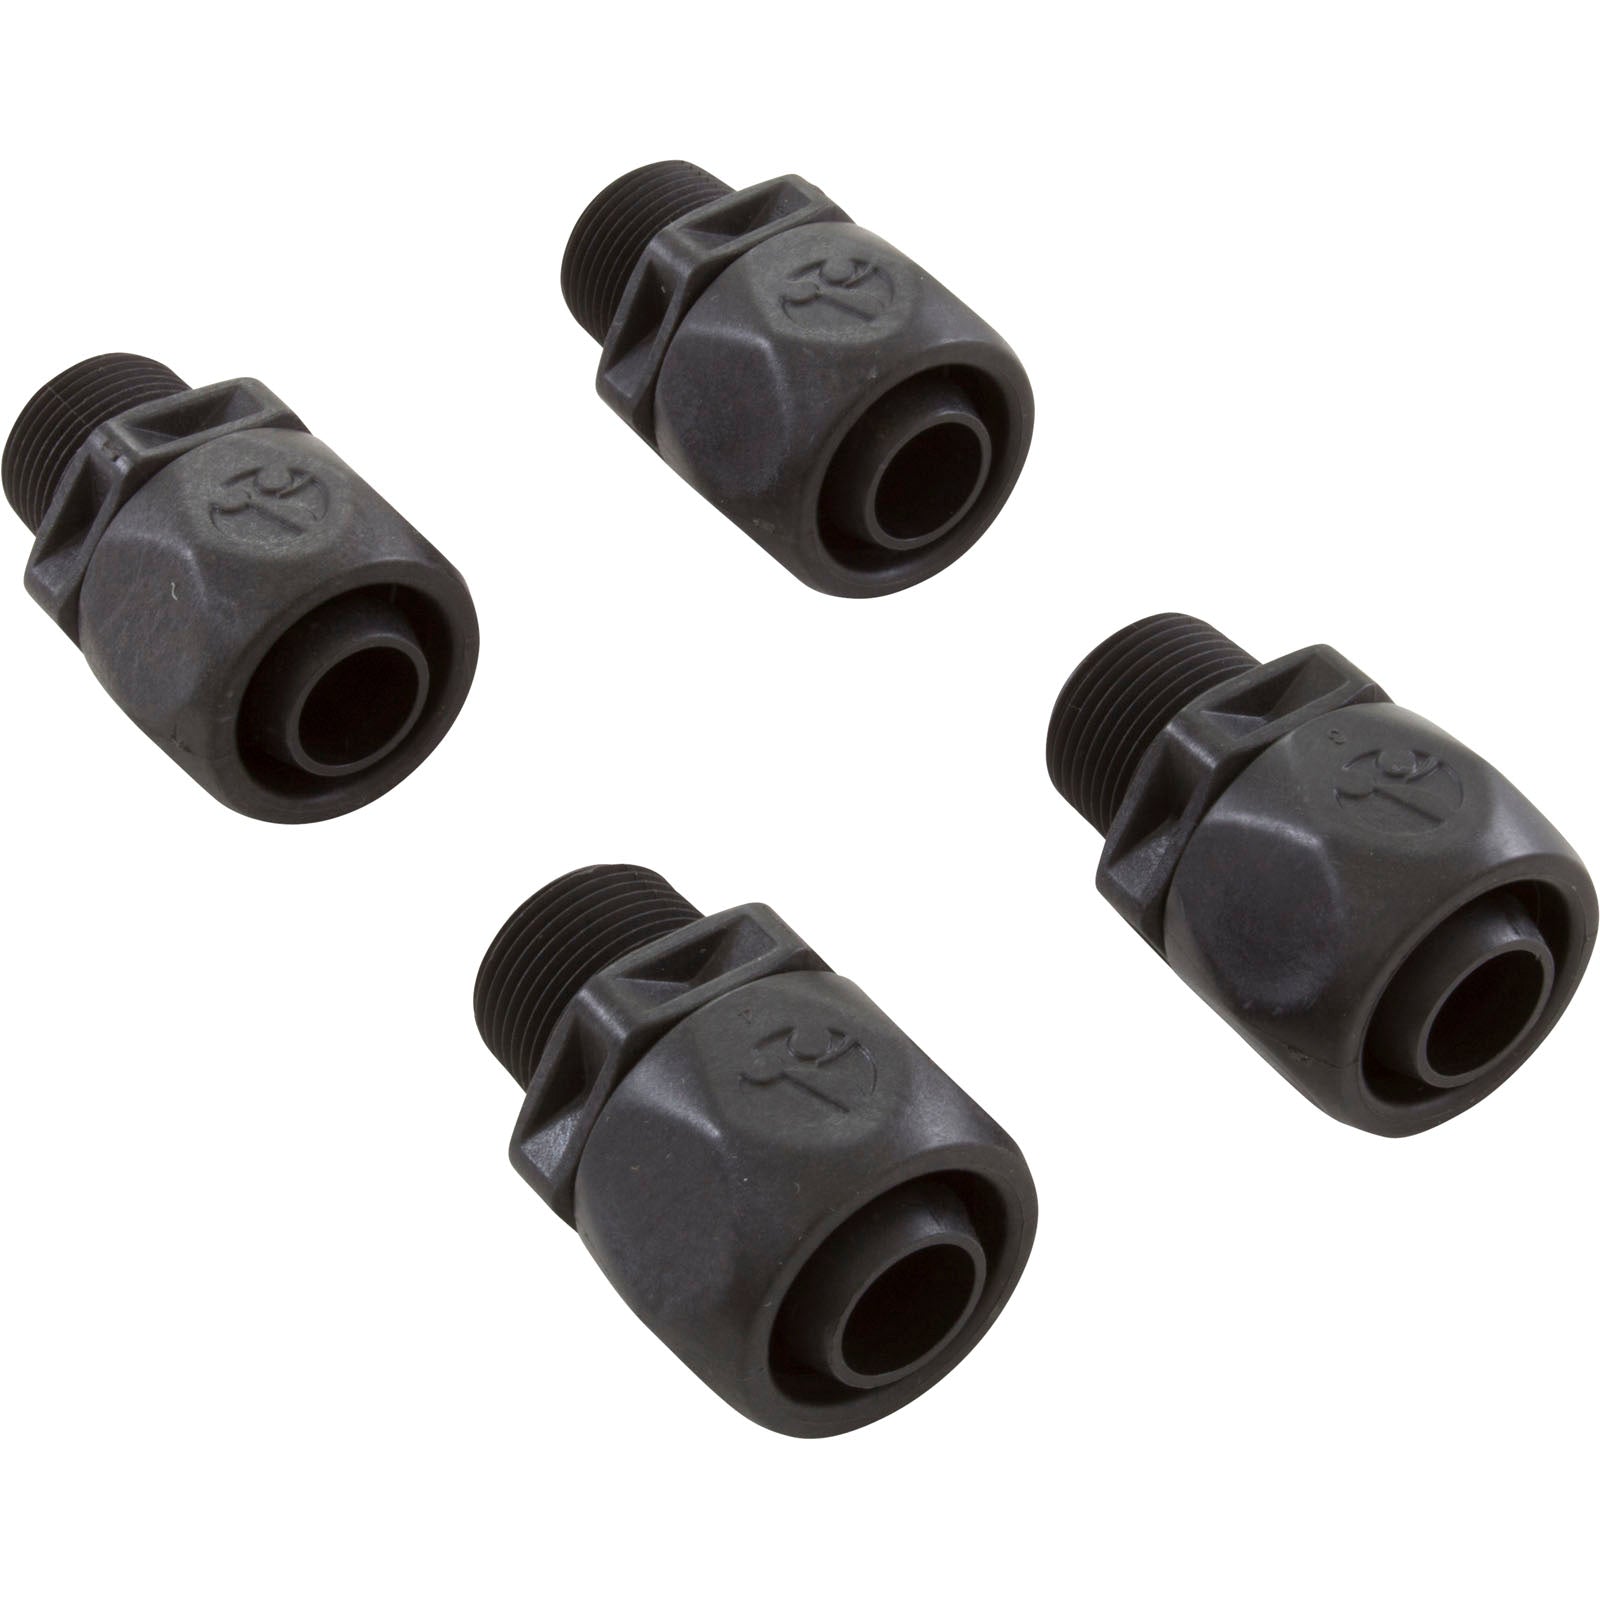 Soft Quick Connect Fittings, 4 Pack, Zodiac Pol Booster Pumps/ R0621000